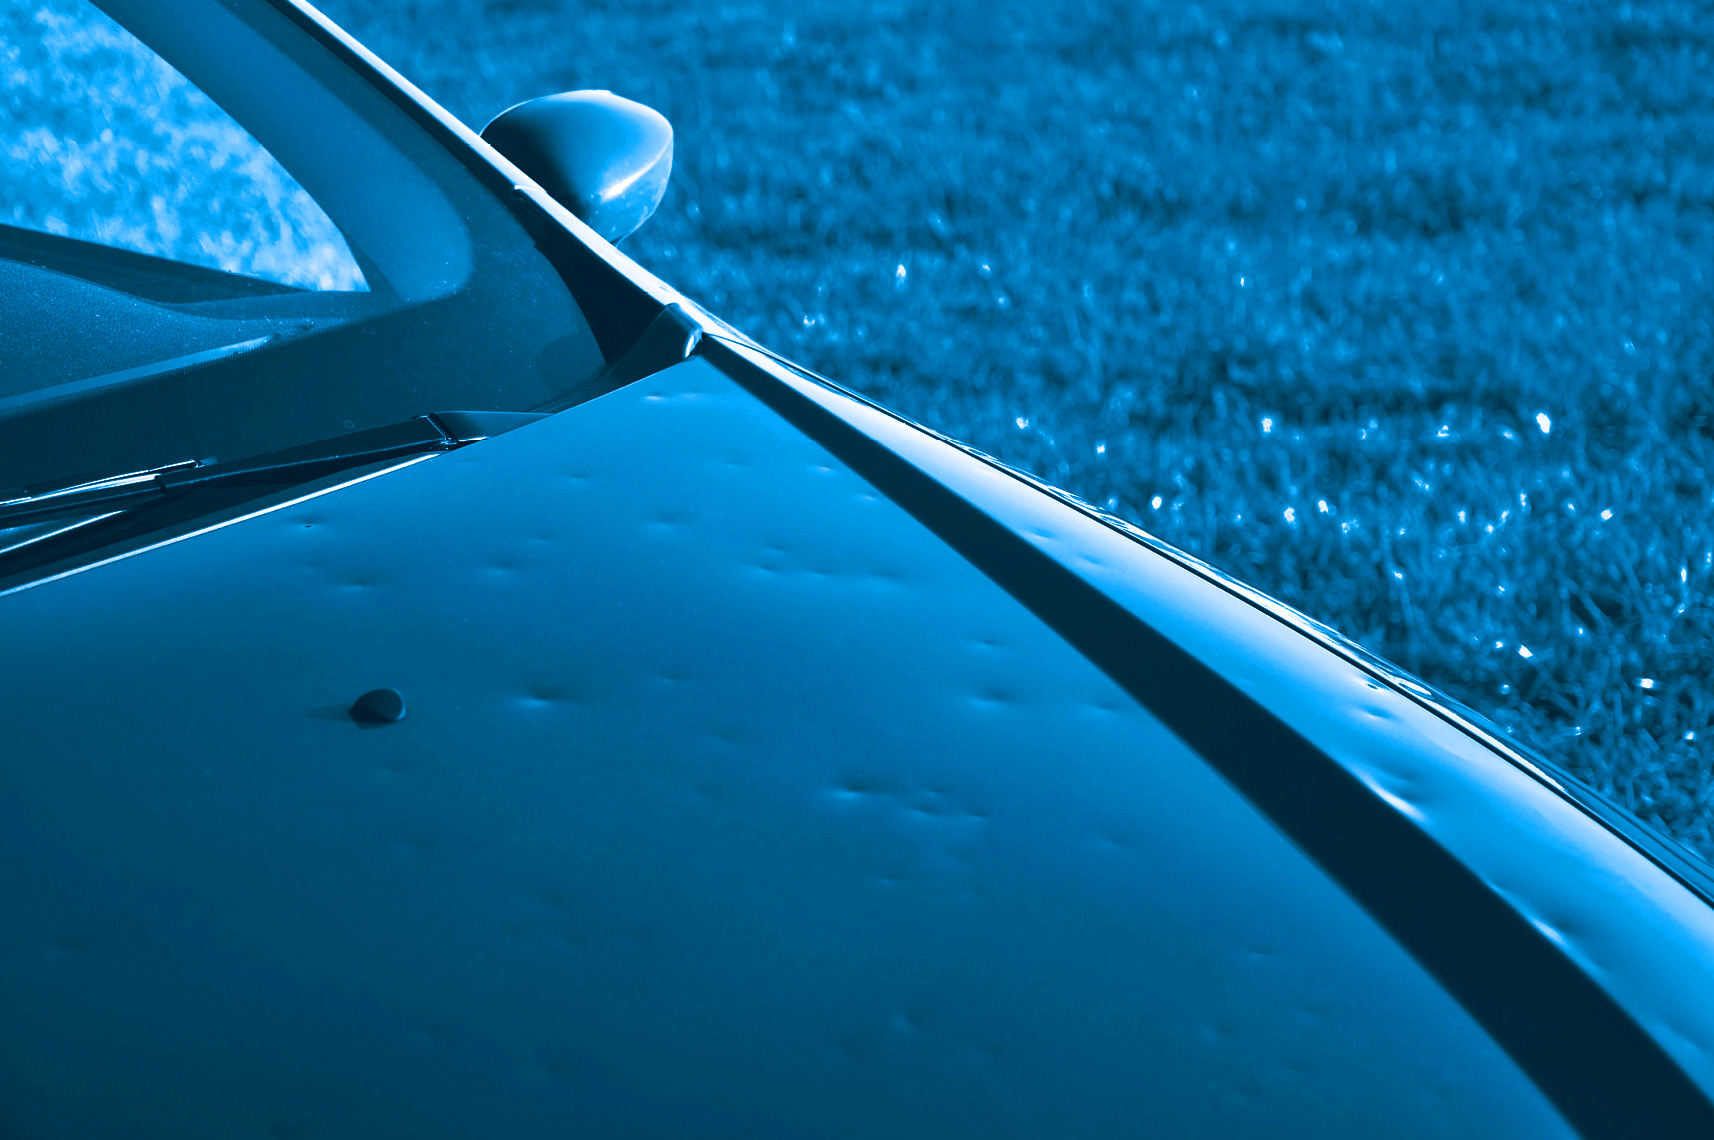 Click to learn more about how we assist insurers with comprehensive outsourced solutions for auto hail claims and repair